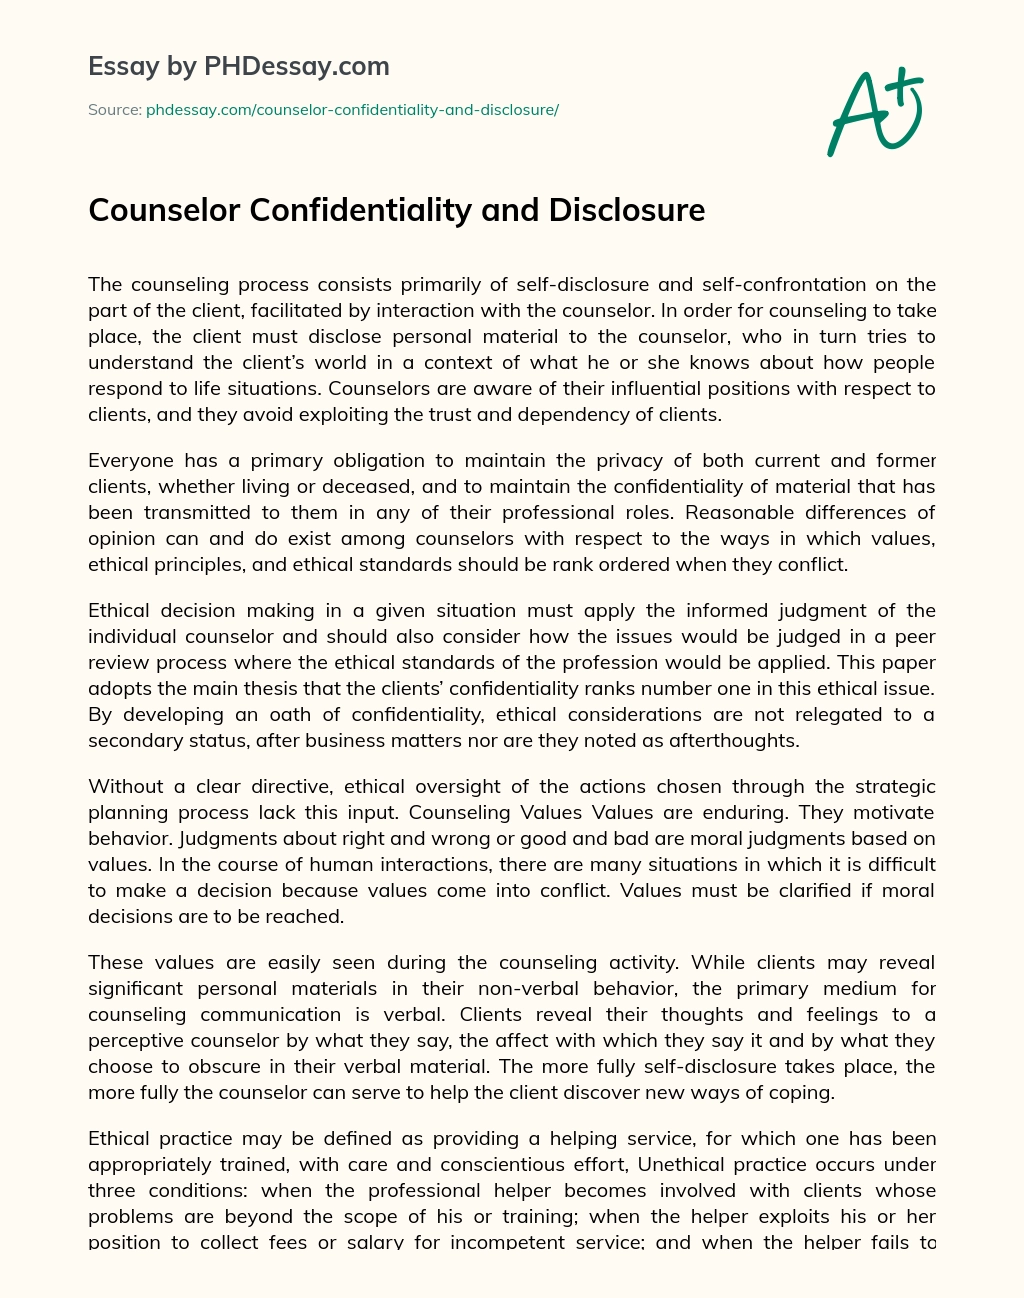 Counselor Confidentiality and Disclosure essay